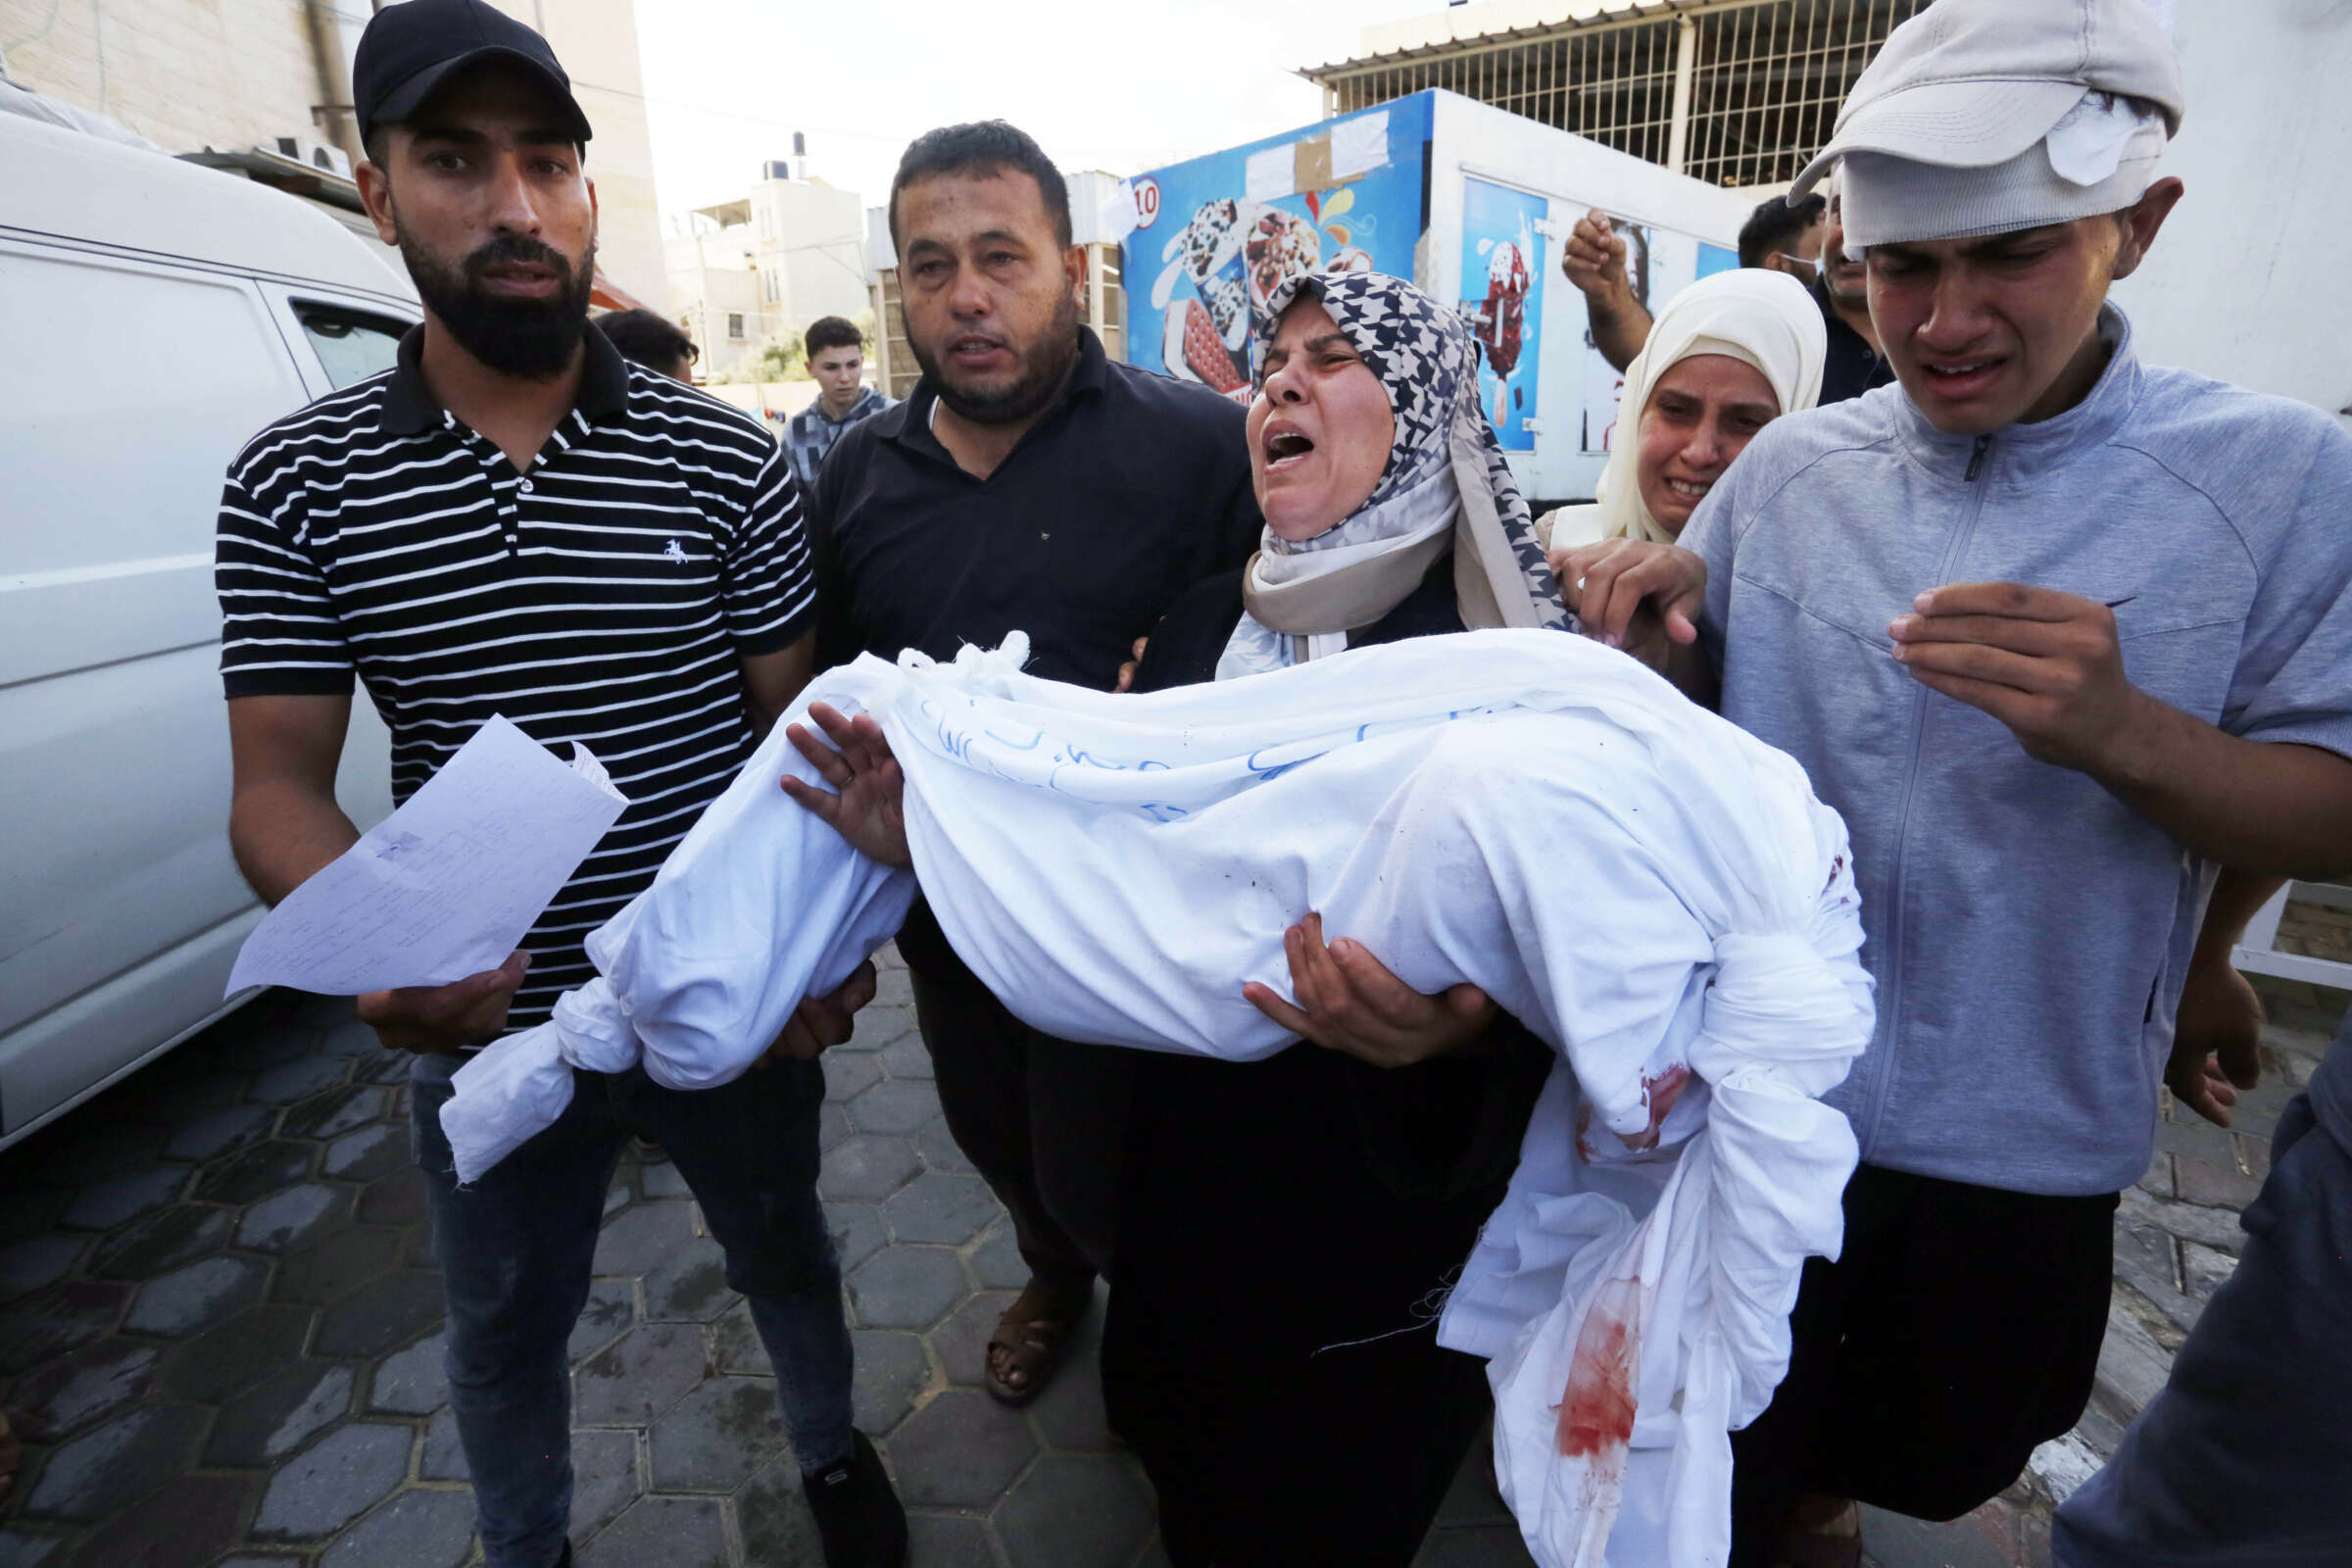 “I Lived All My Life as Collateral Damage,” Says Palestinian Activist ...